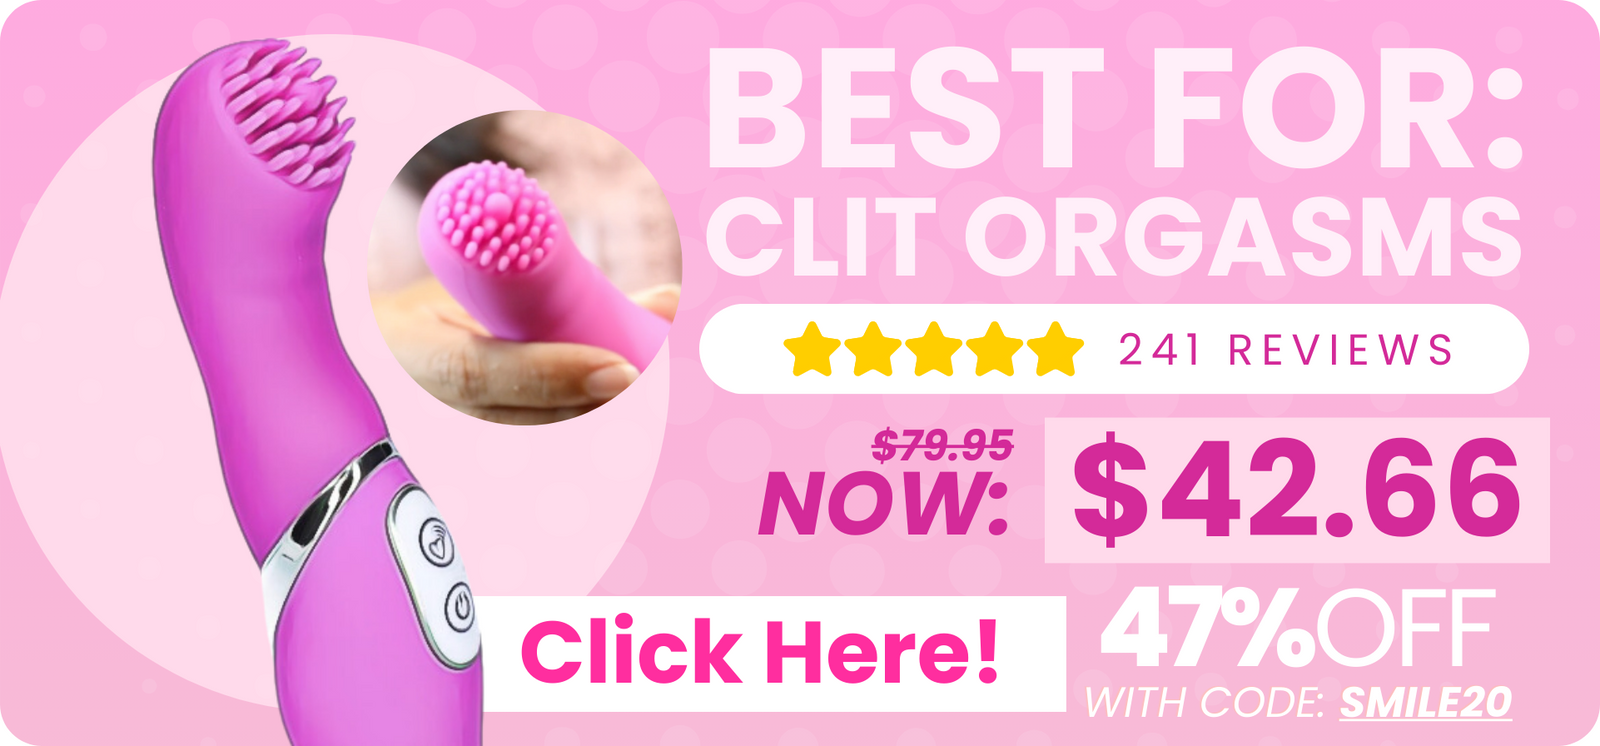 Click here to get our best-selling clit toy for $42.66 with code SMILE20